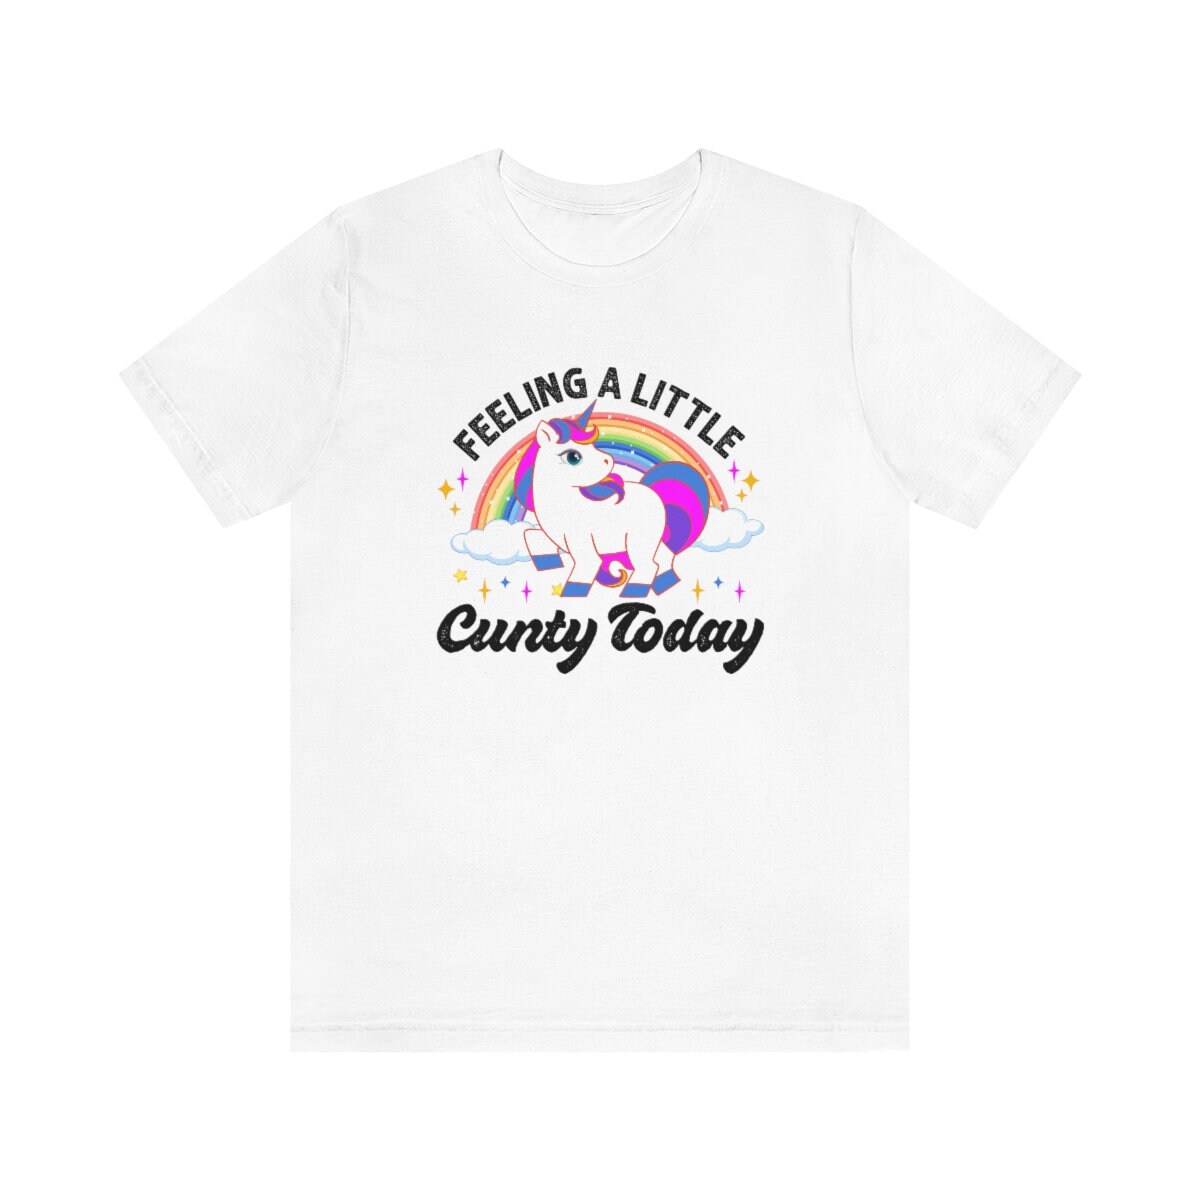 Feeling A Little Cunty Today Funny Womens Shirt Rude